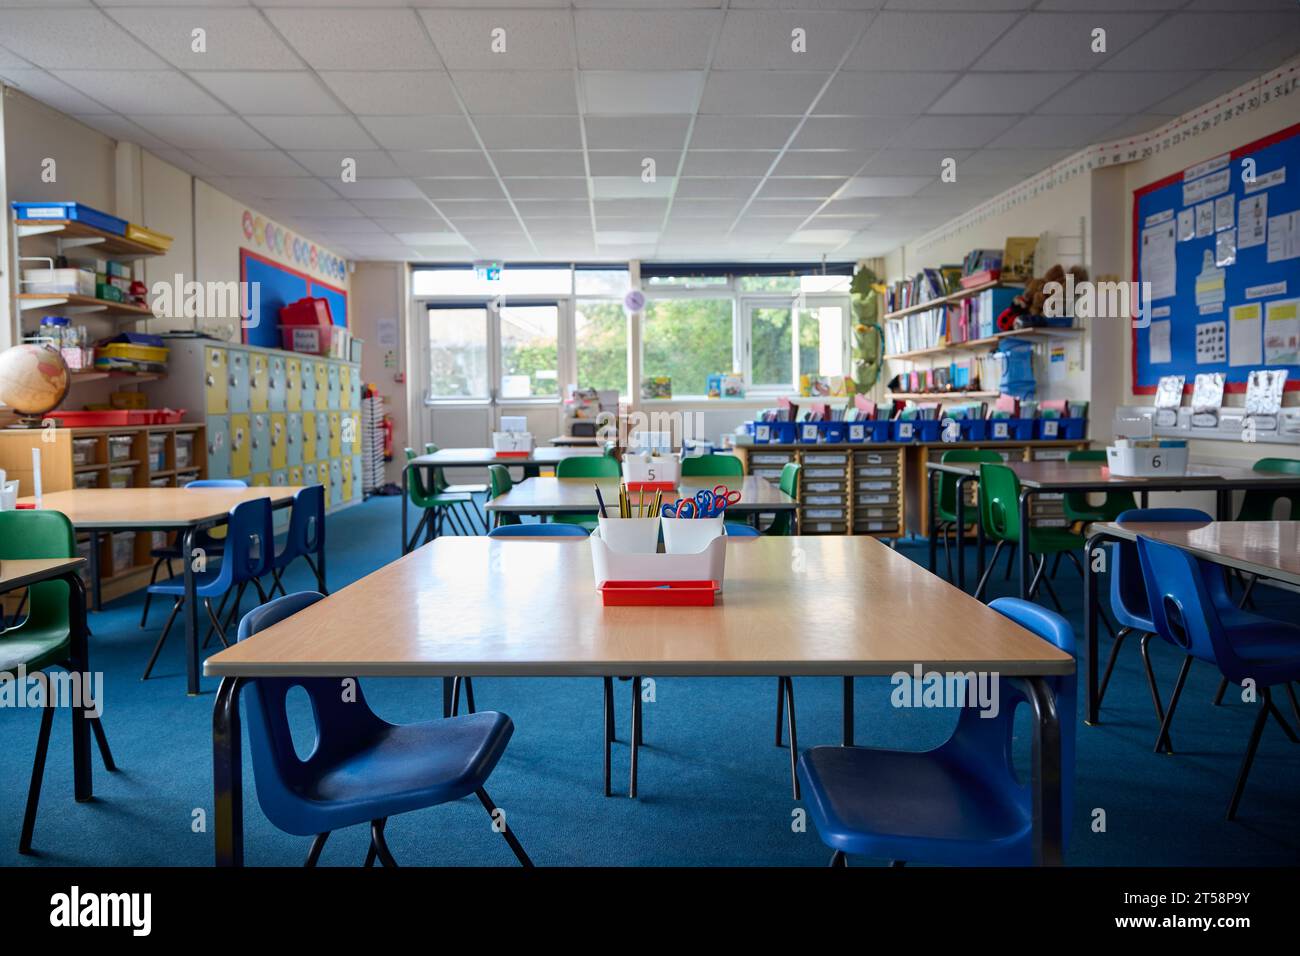 Empty Tables And Chairs In Primary Or Elementary School Classroom Stock Photo